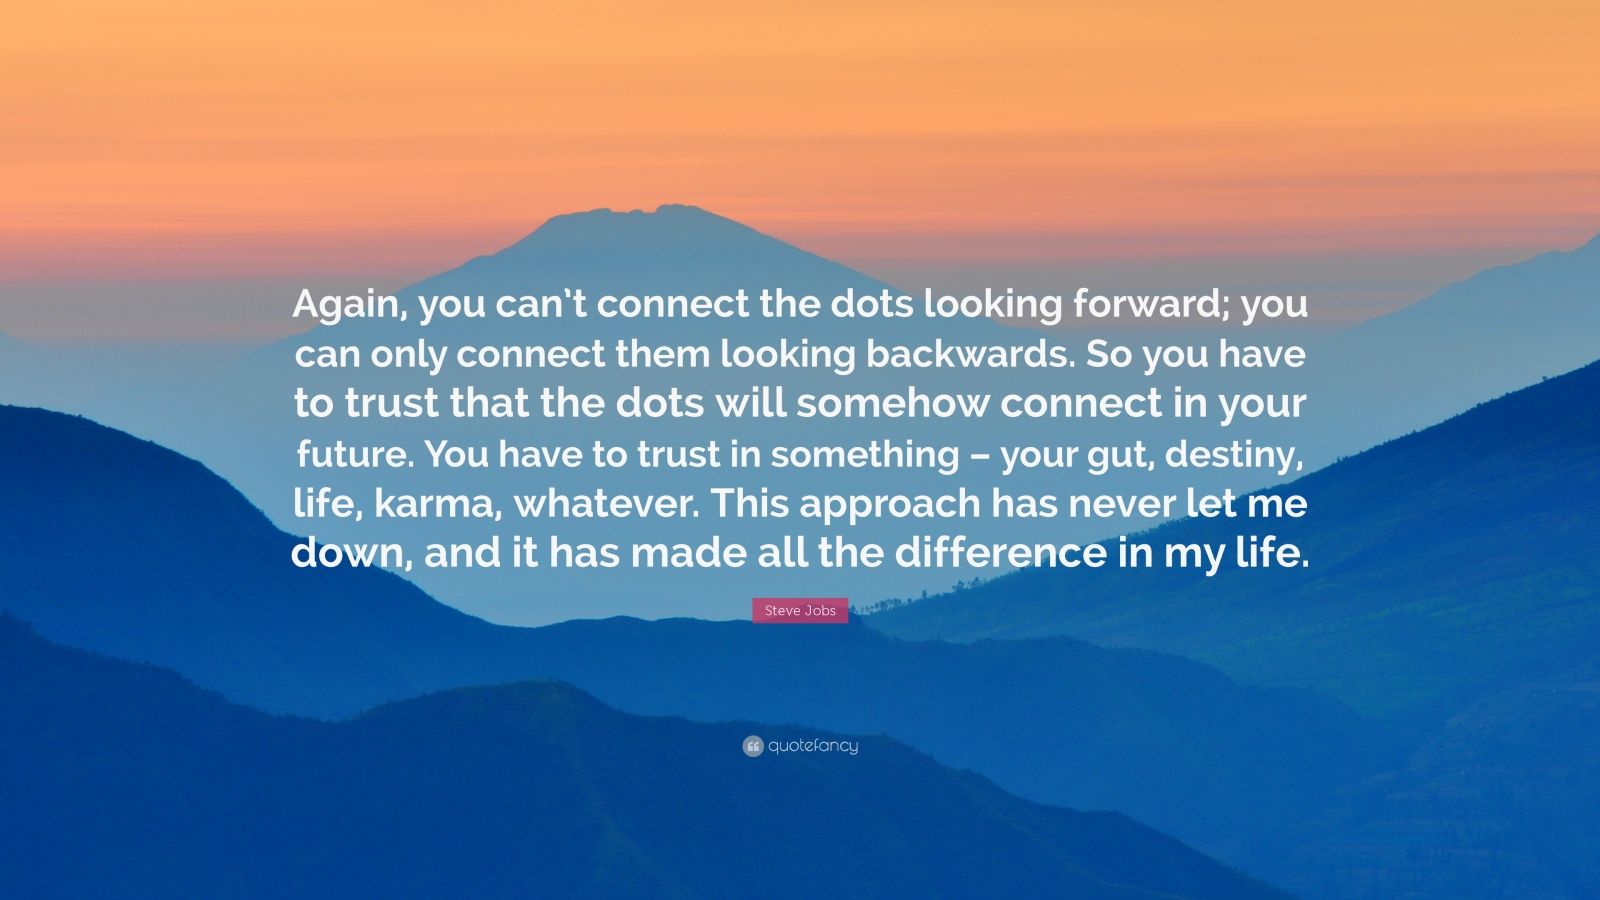 Steve Jobs Quote: “Again, you can’t connect the dots looking forward